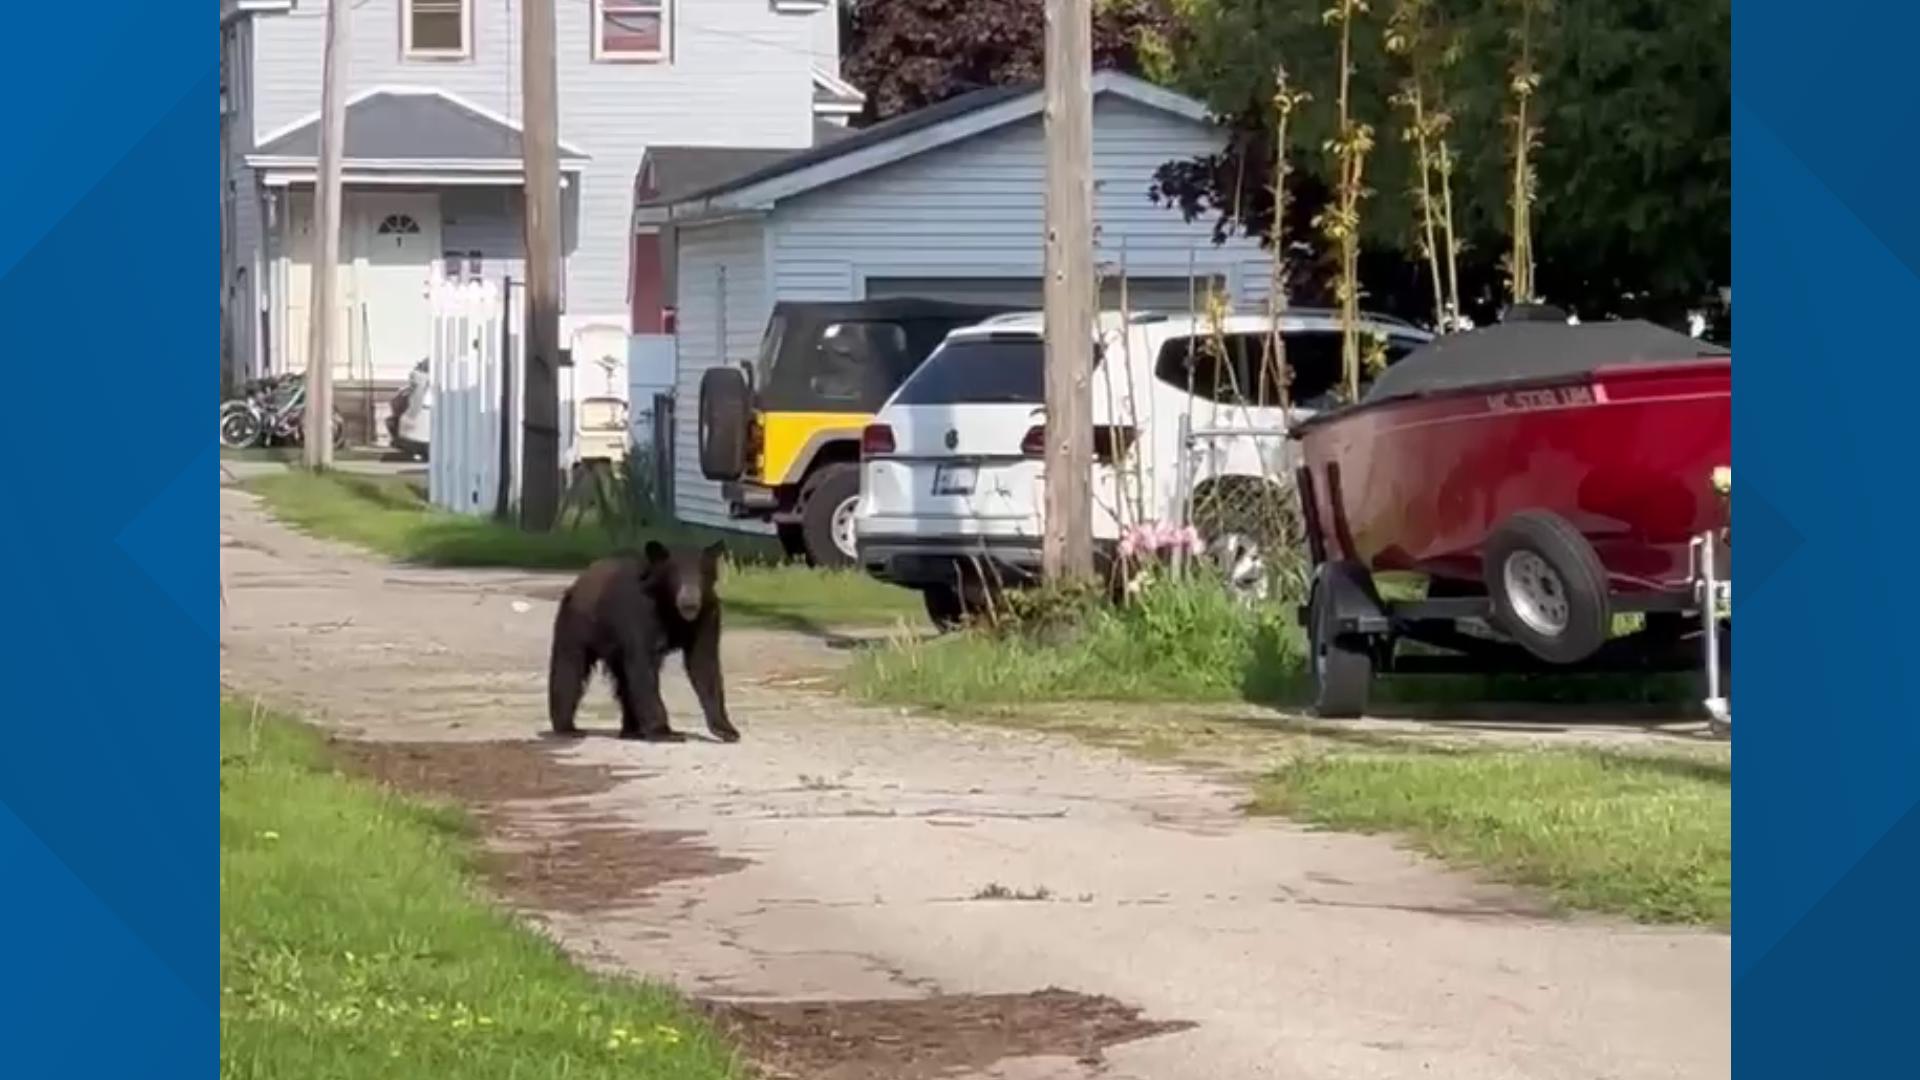 Neighbors took video of the bear walking in driveways. It was last spotted headed into the school forest area.